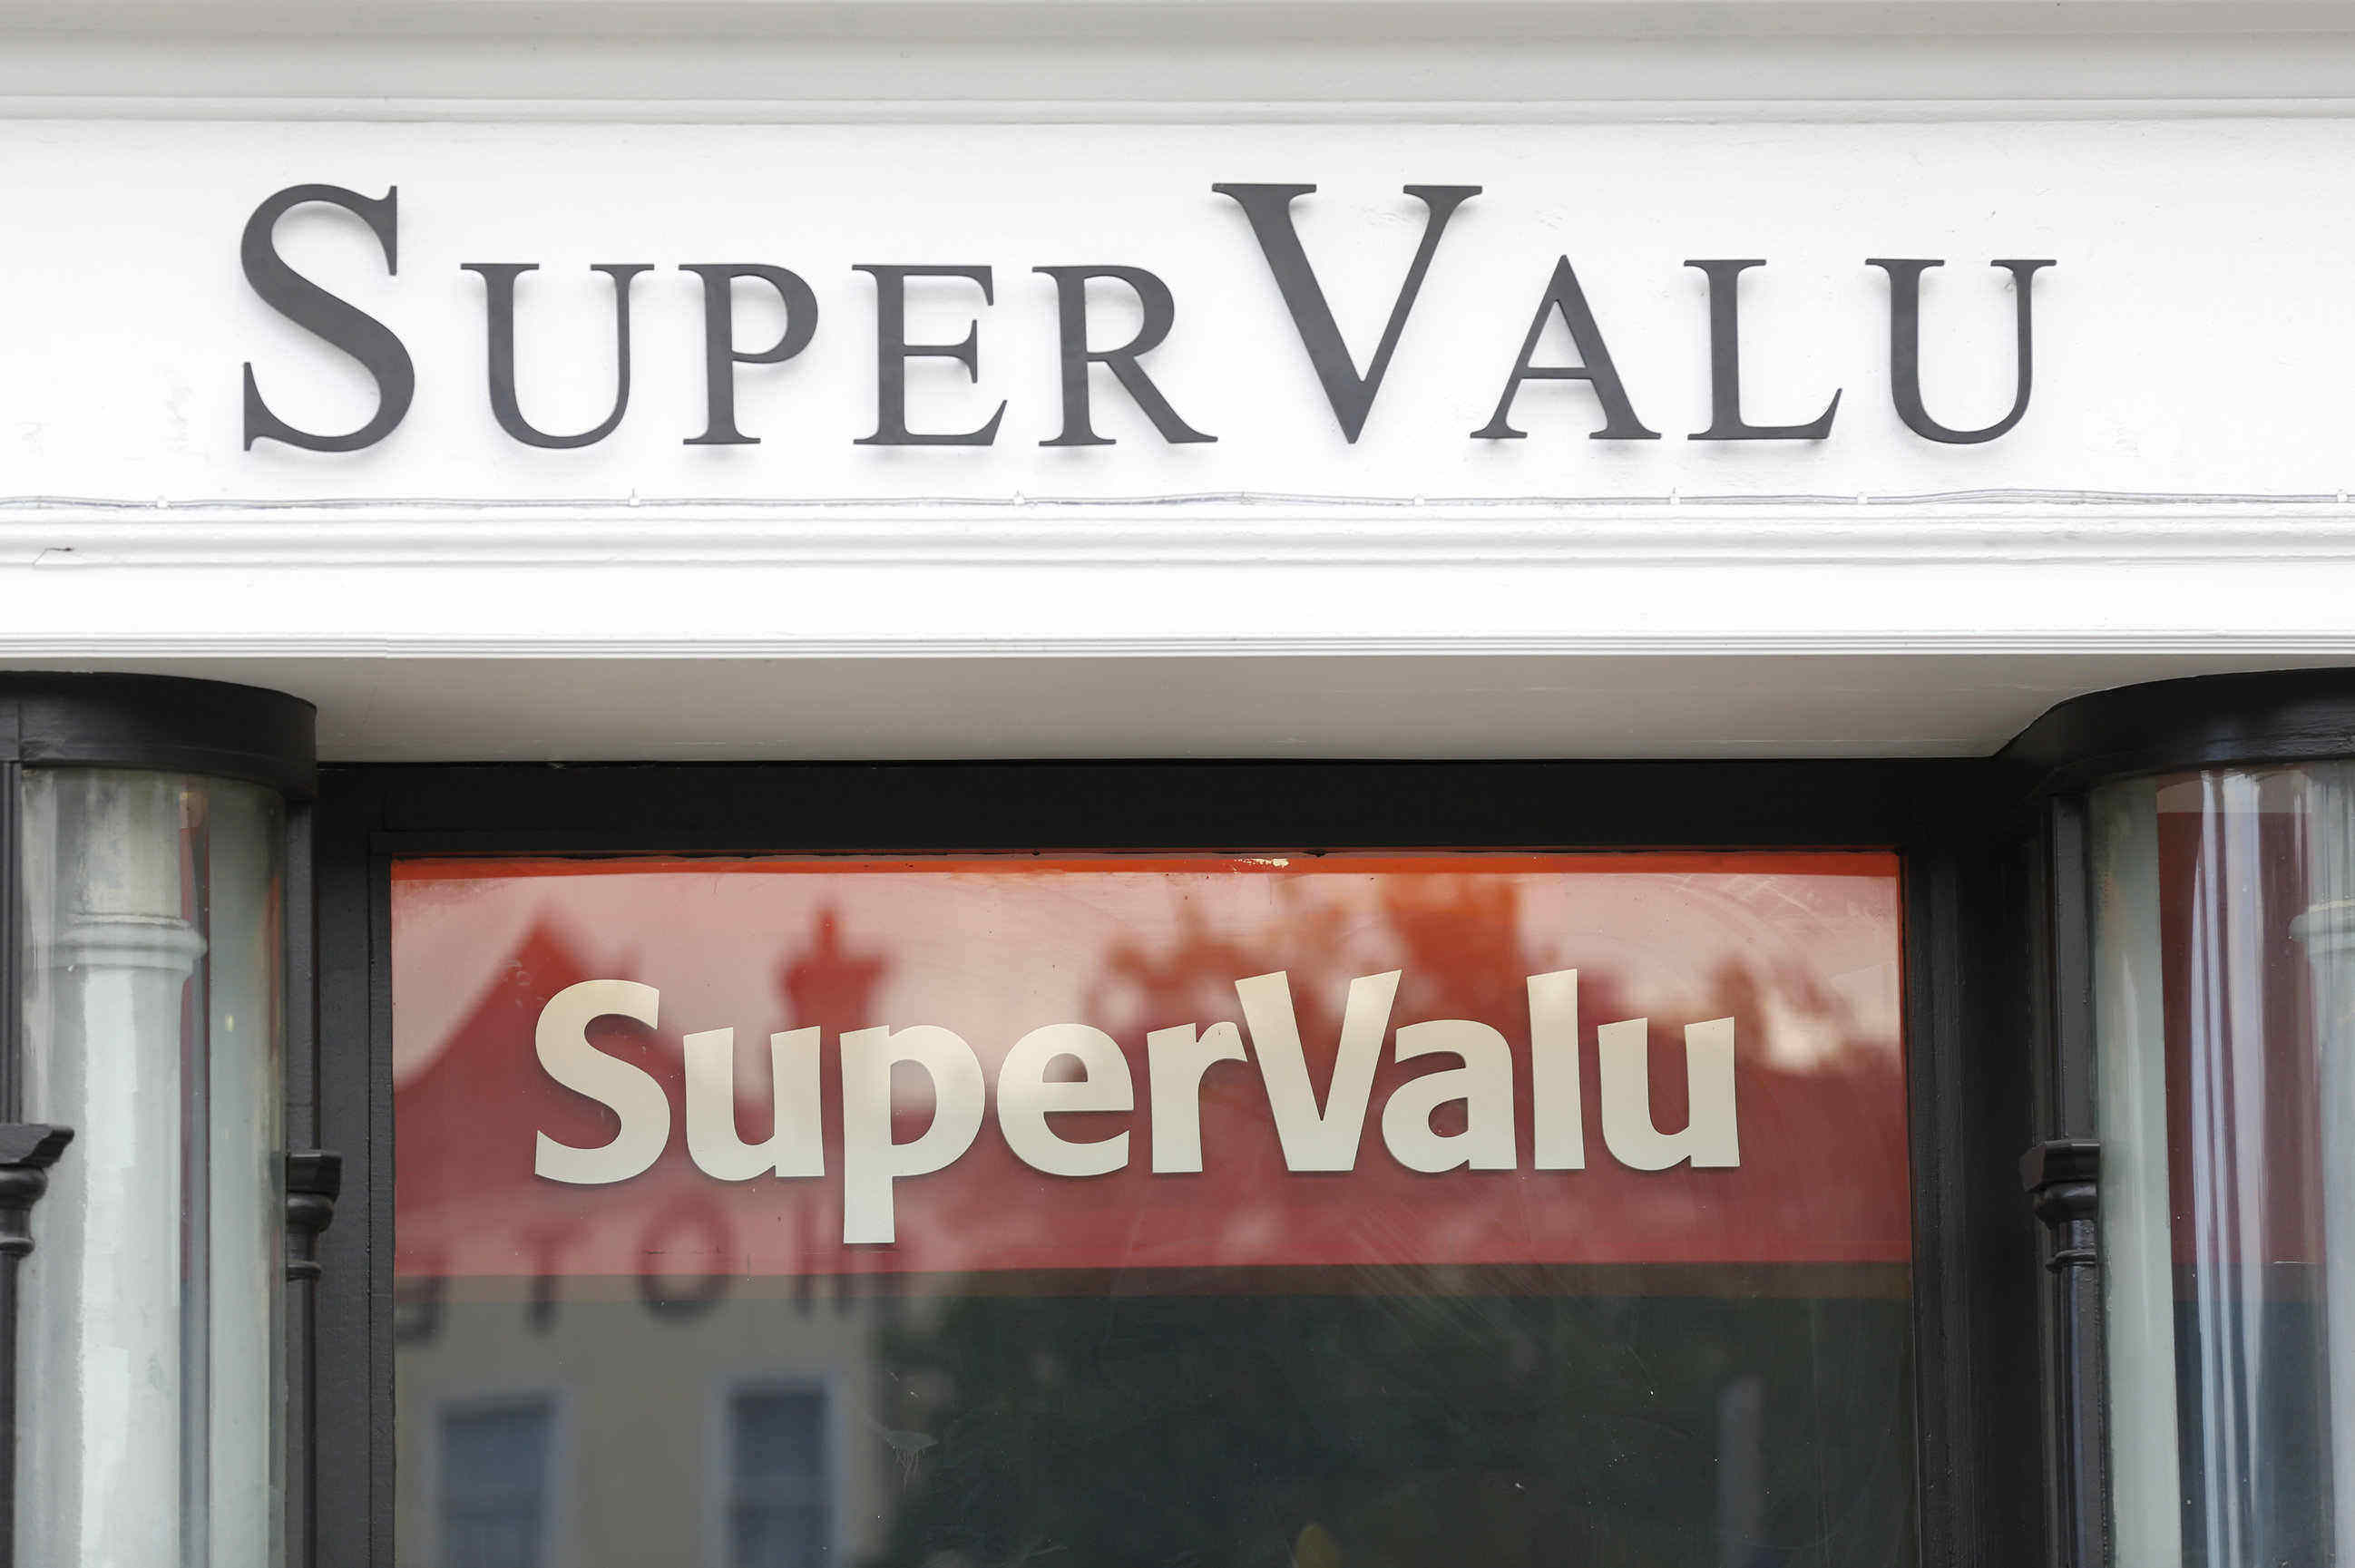 SuperValu's market share dropped slightly from 26.5% to 23/8% in the 52 weeks to the week ending December the 26th 2021 when compared to the 52-week period to the 27th of December 2020.